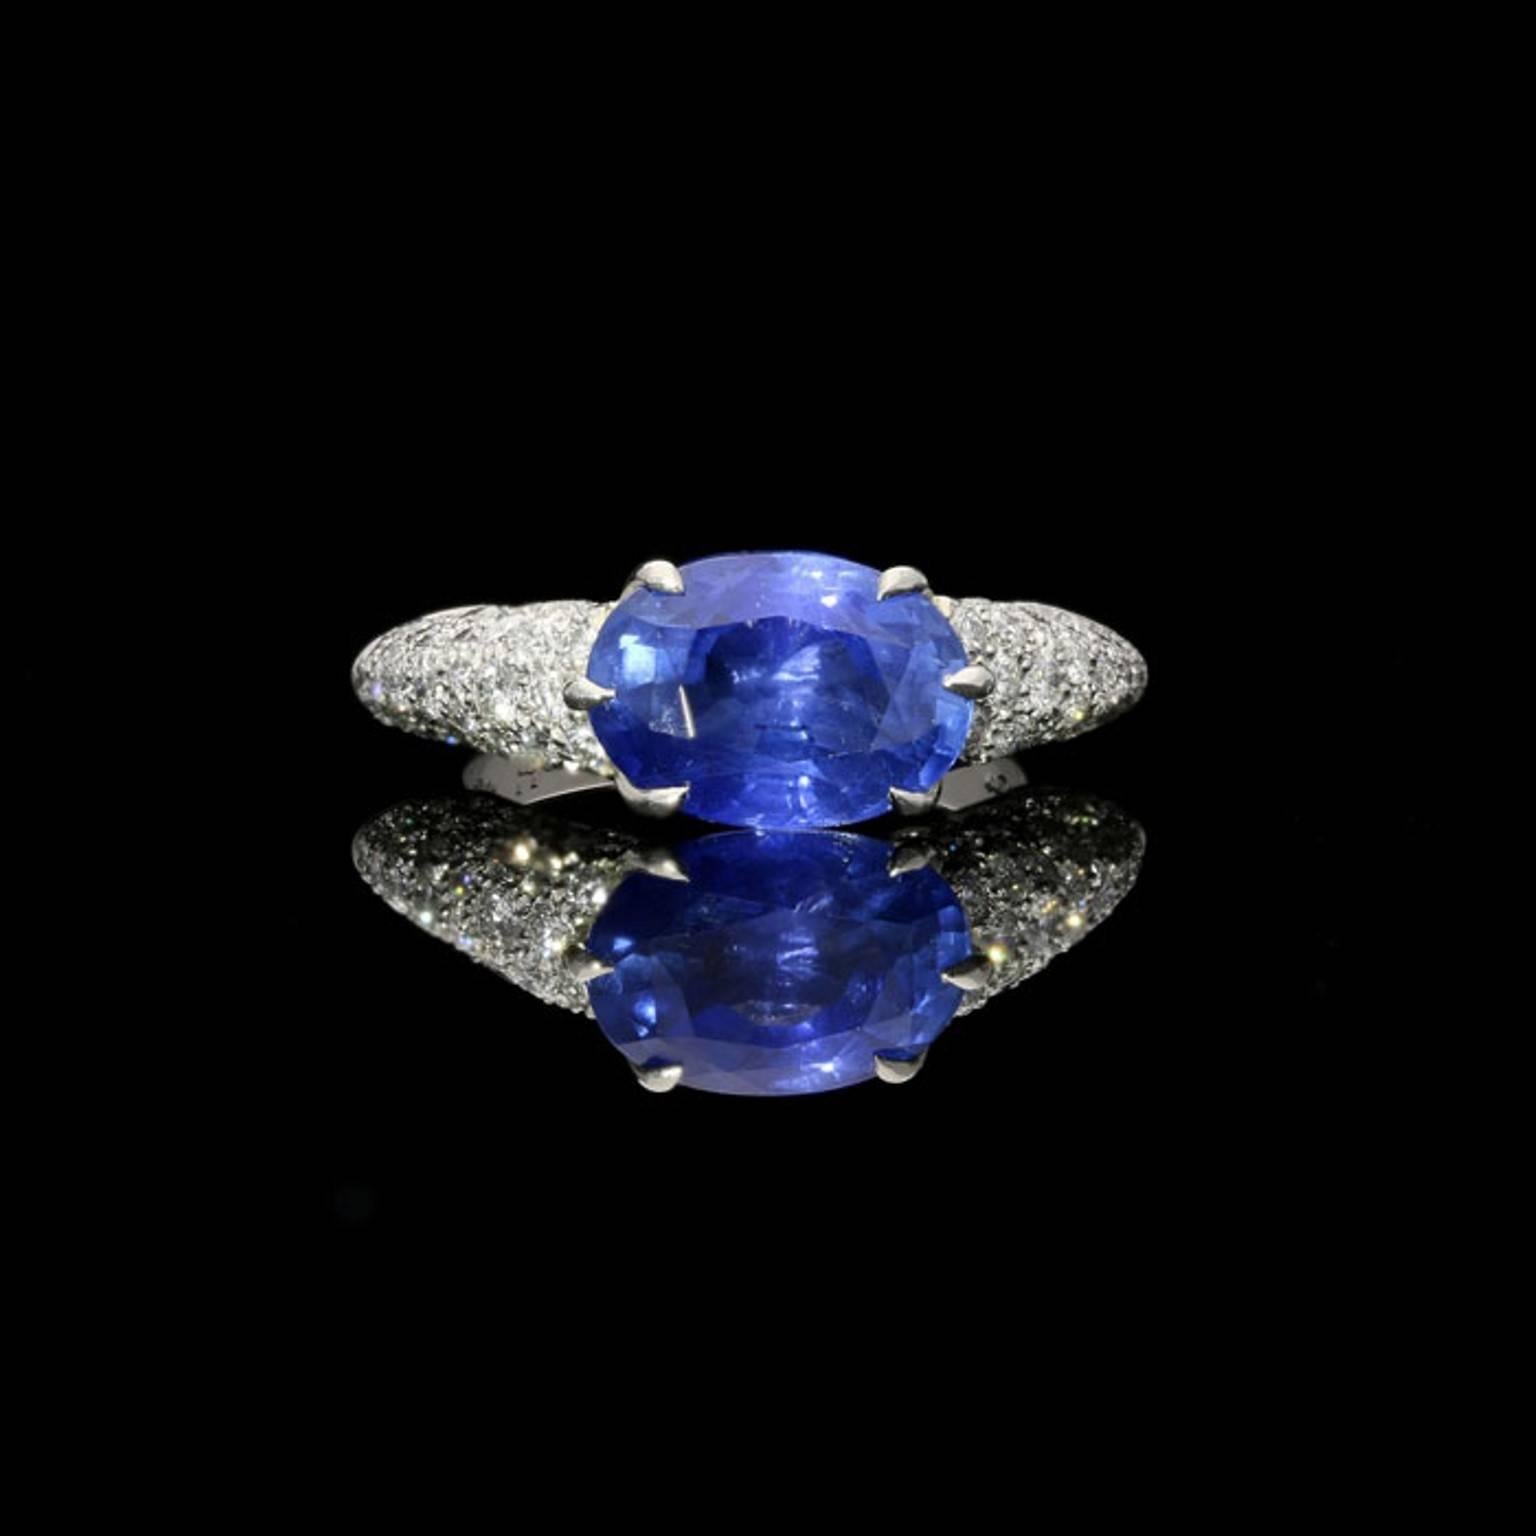 A beautiful sapphire and diamond ring by Hancocks centred with an oval blue unheated Sri Lankan sapphire weighing 4.76 carats claw set horizontally within a round brilliant diamond pavé set platinum mount.

Oval unheated sapphire 4.76 carat with